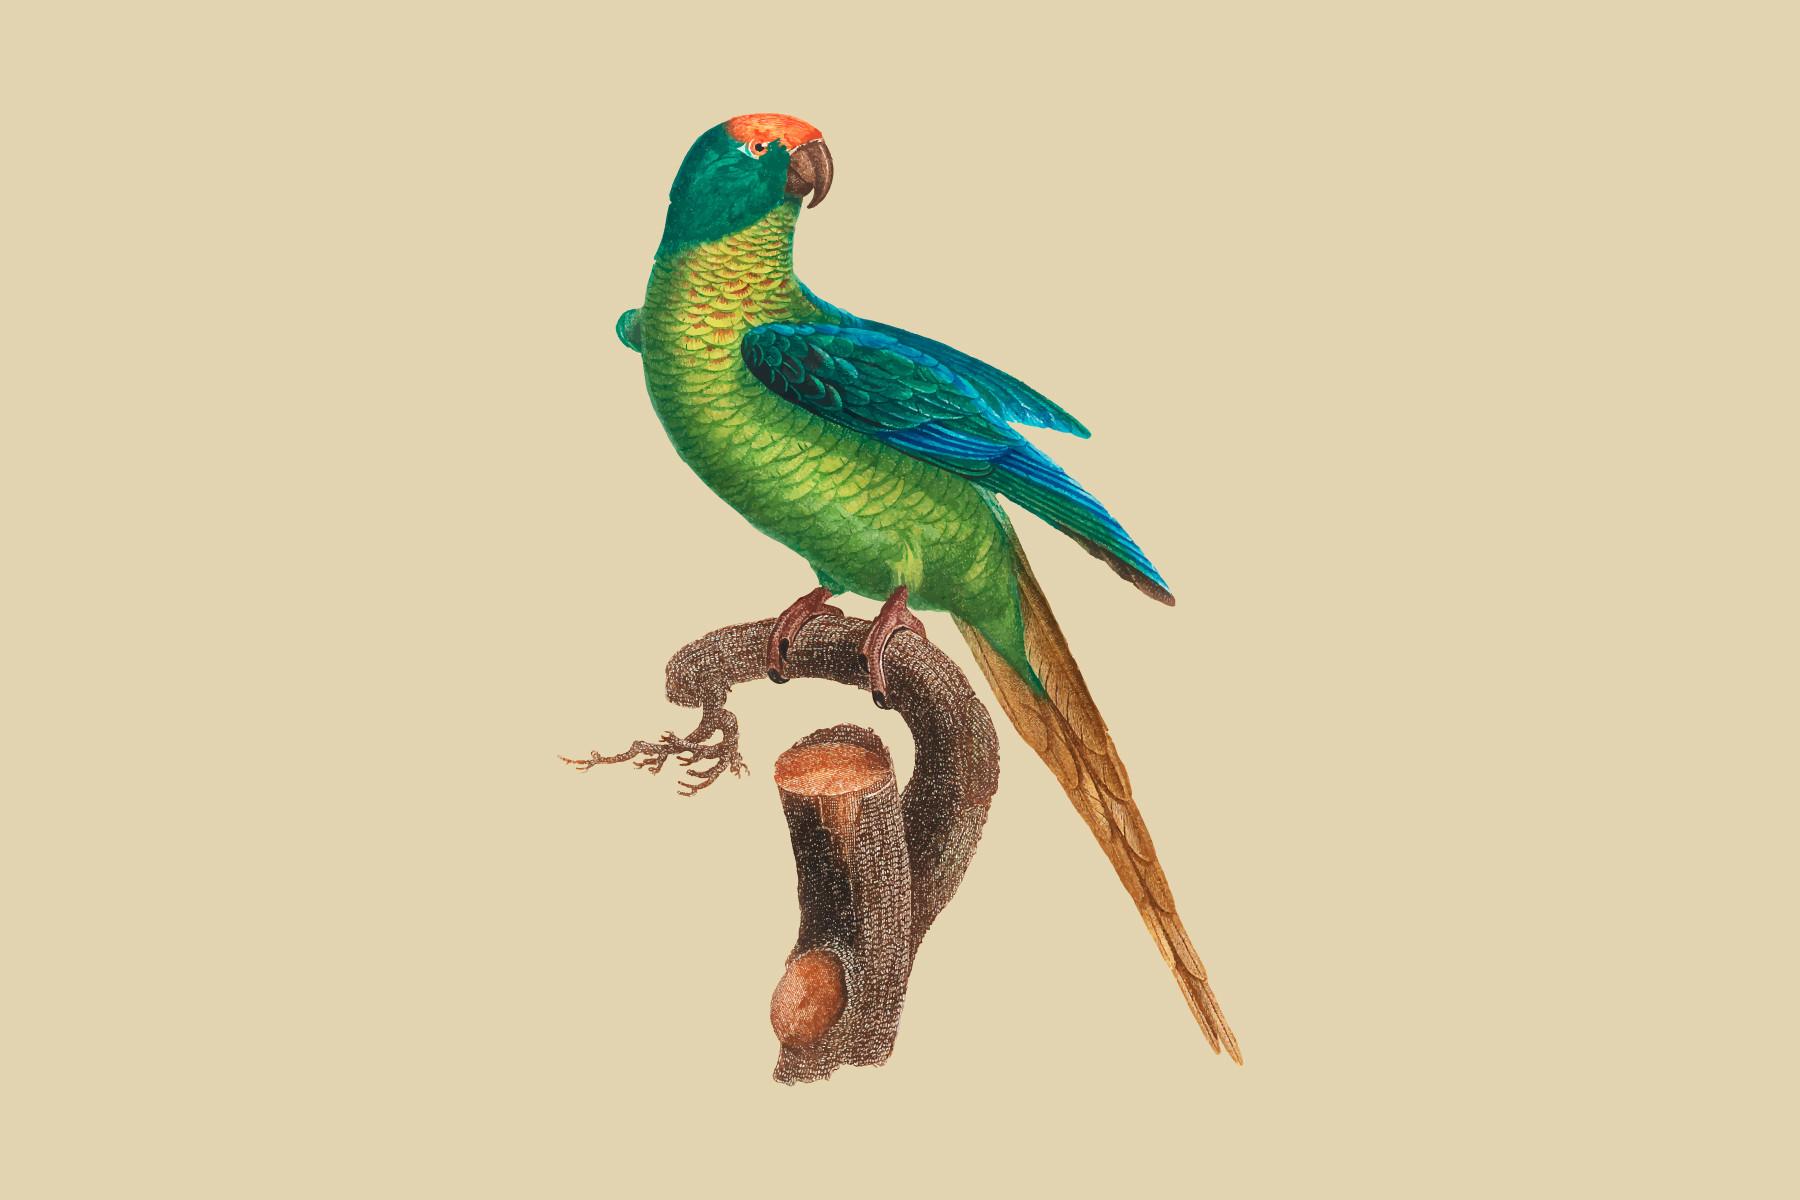 The Peach-Fronted Parakeet Illustration